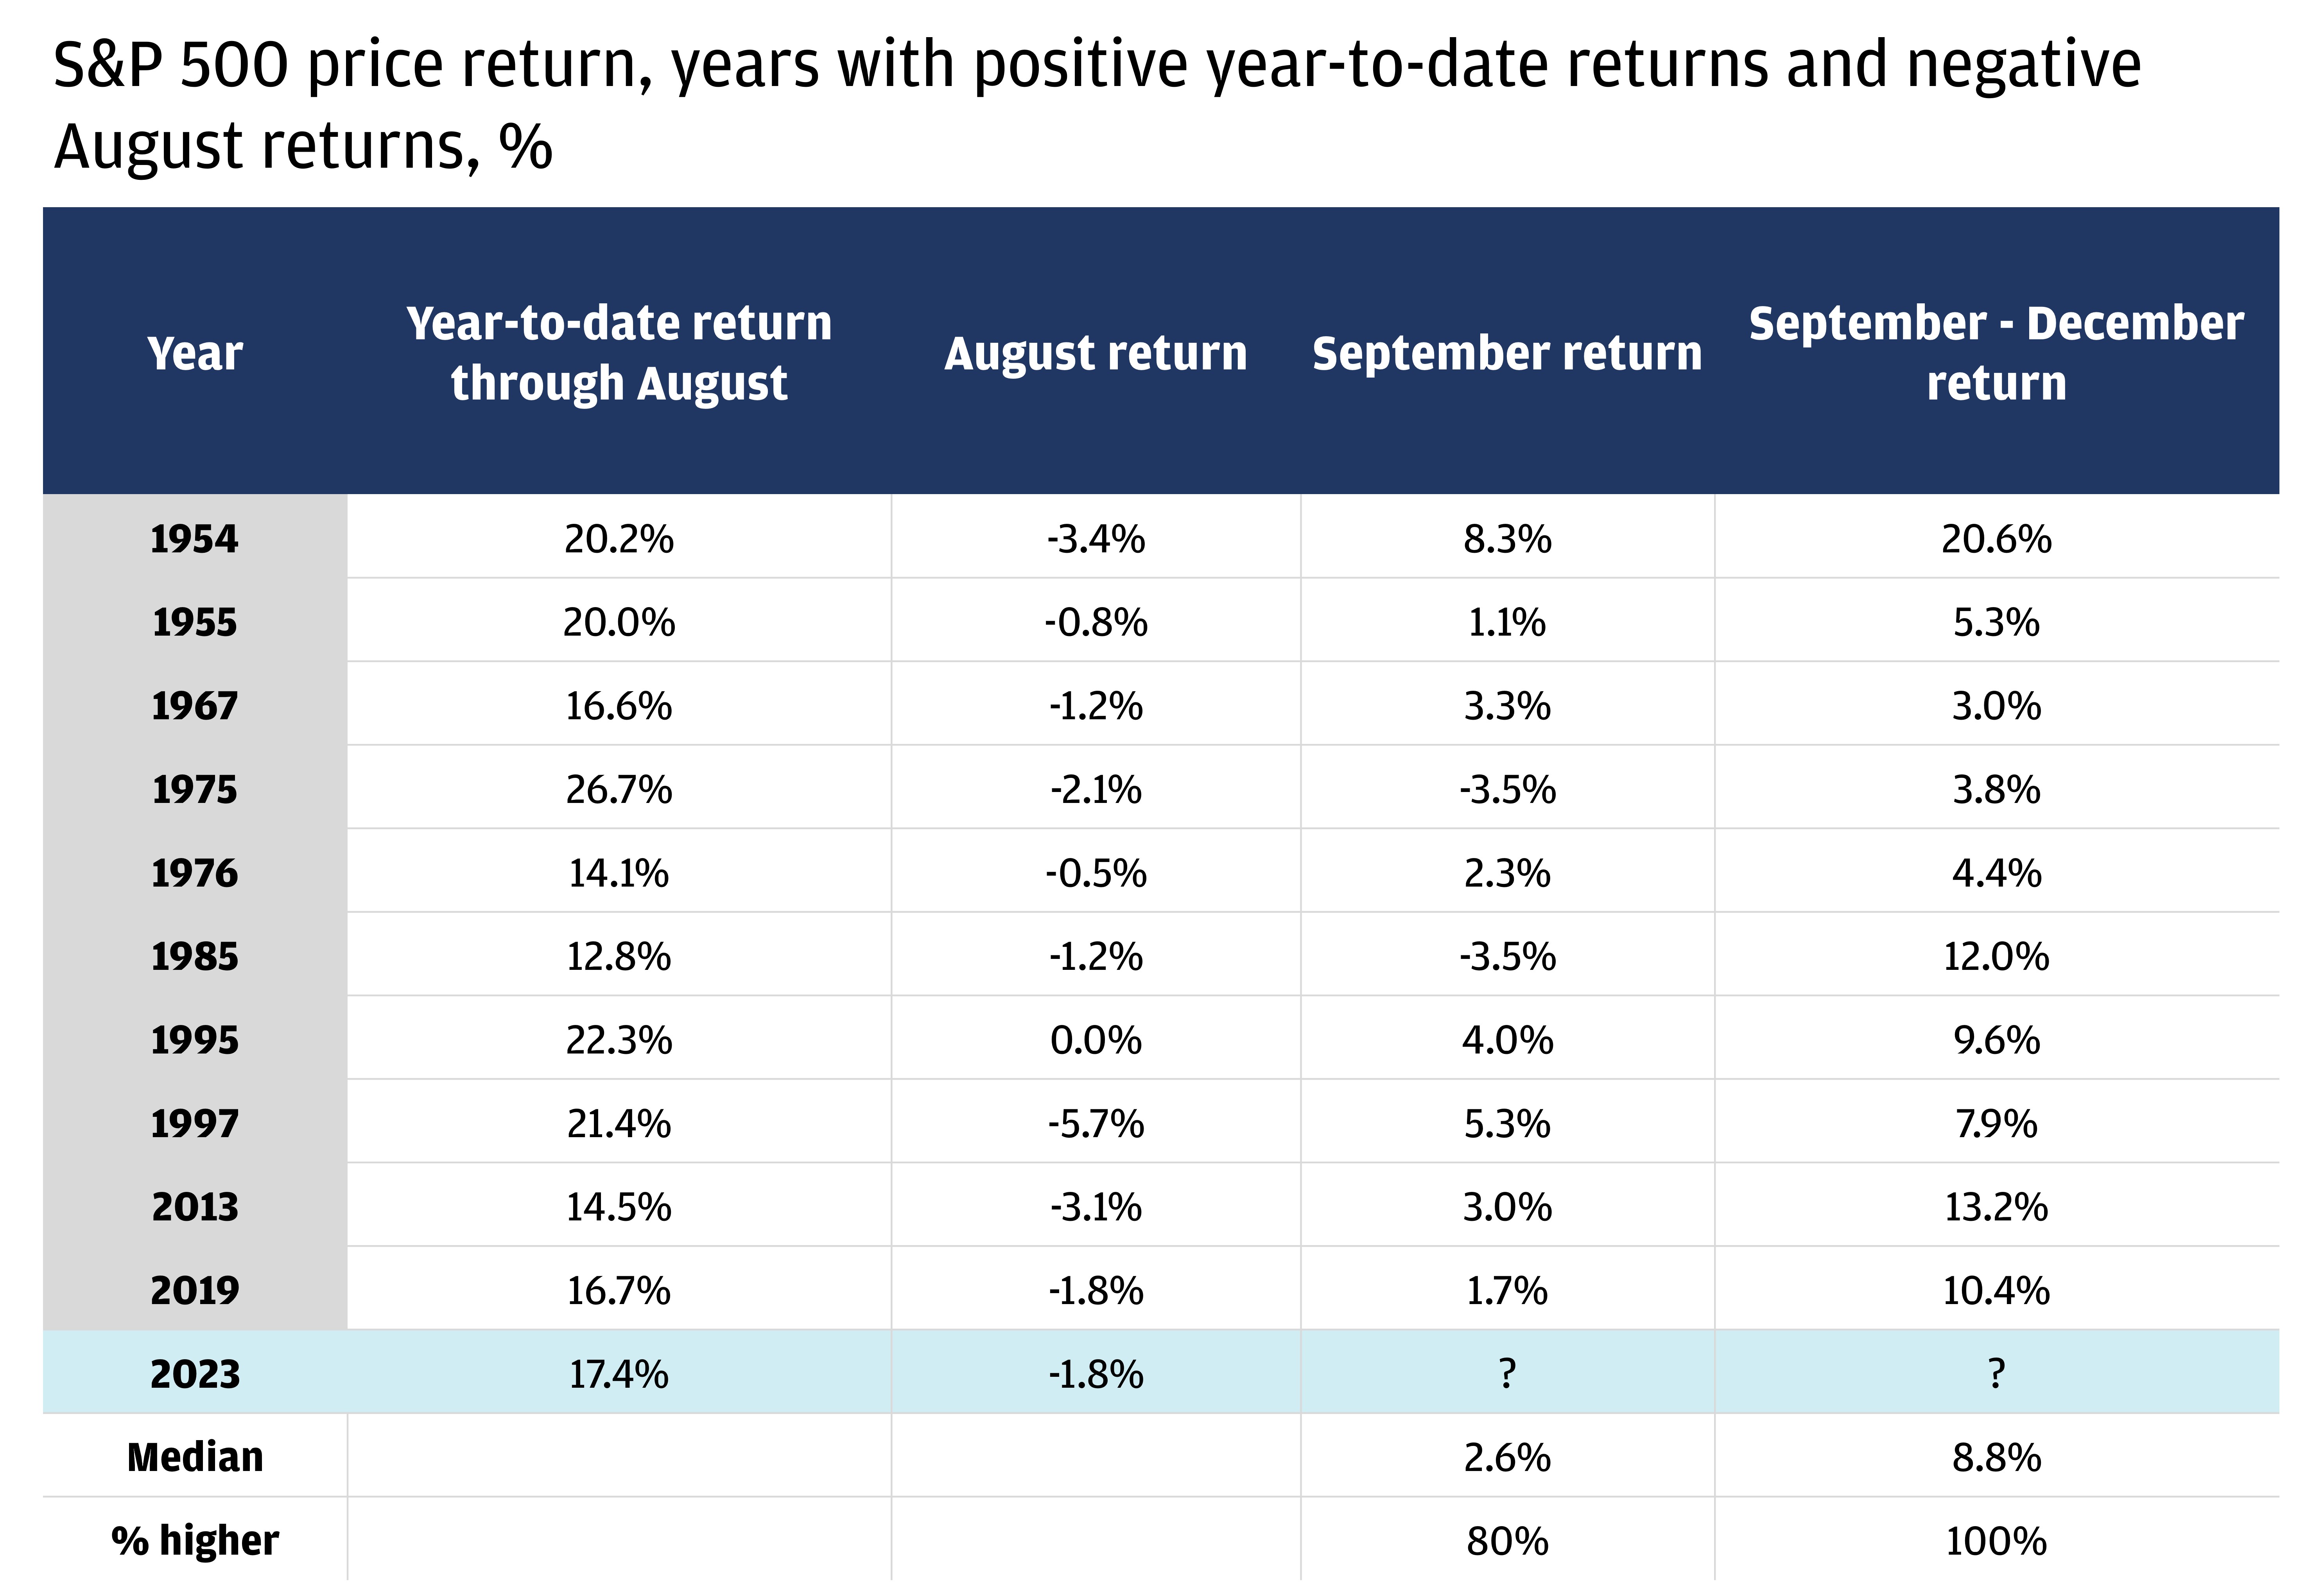 This chart shows returns in years with negative August returns and positive YTD returns through August. 